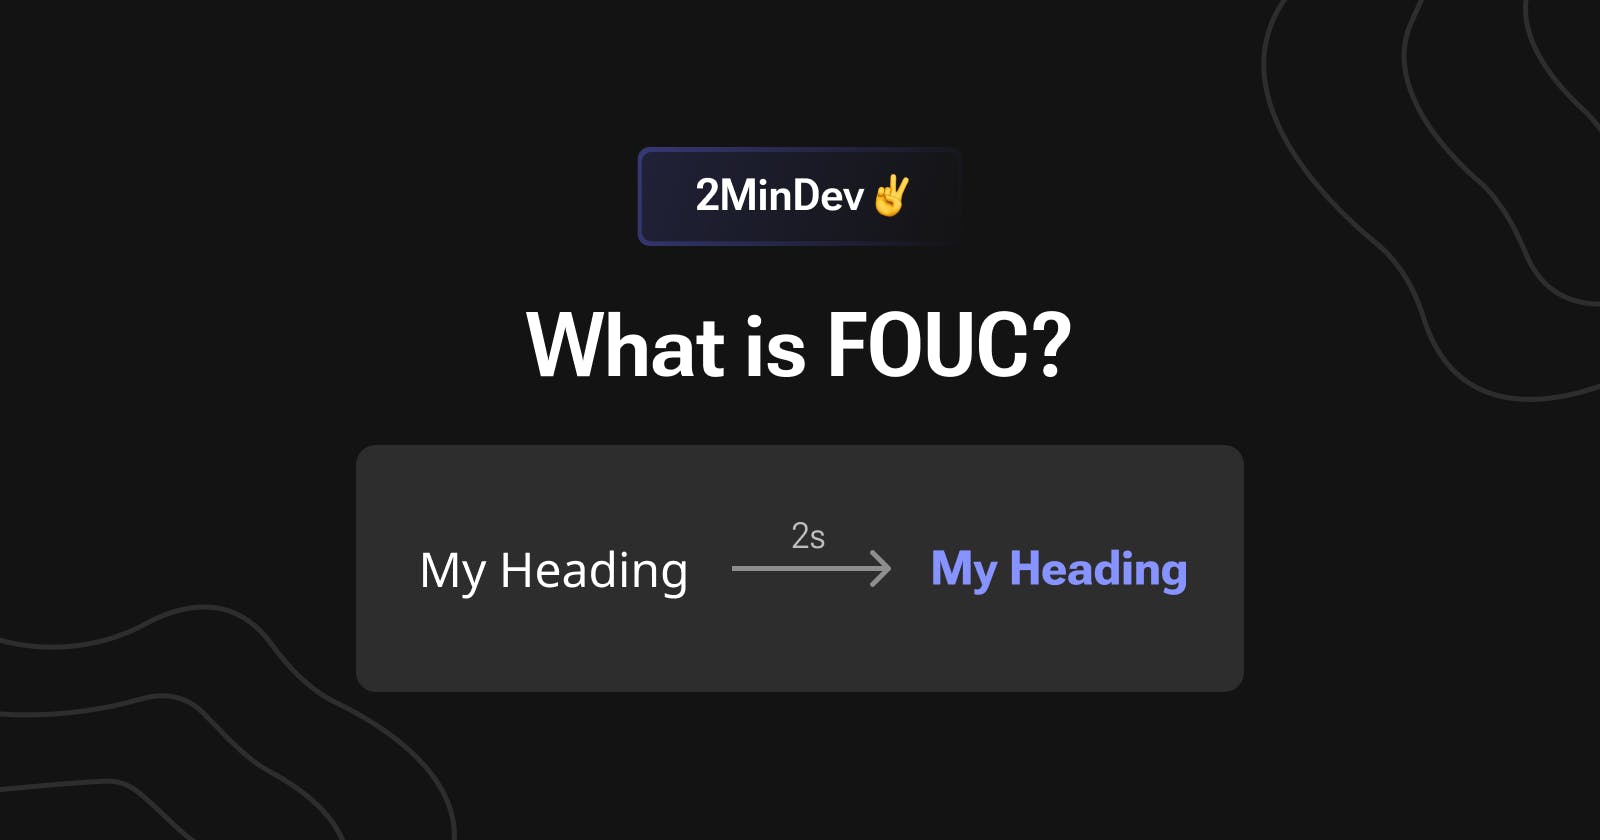 What is FOUC?